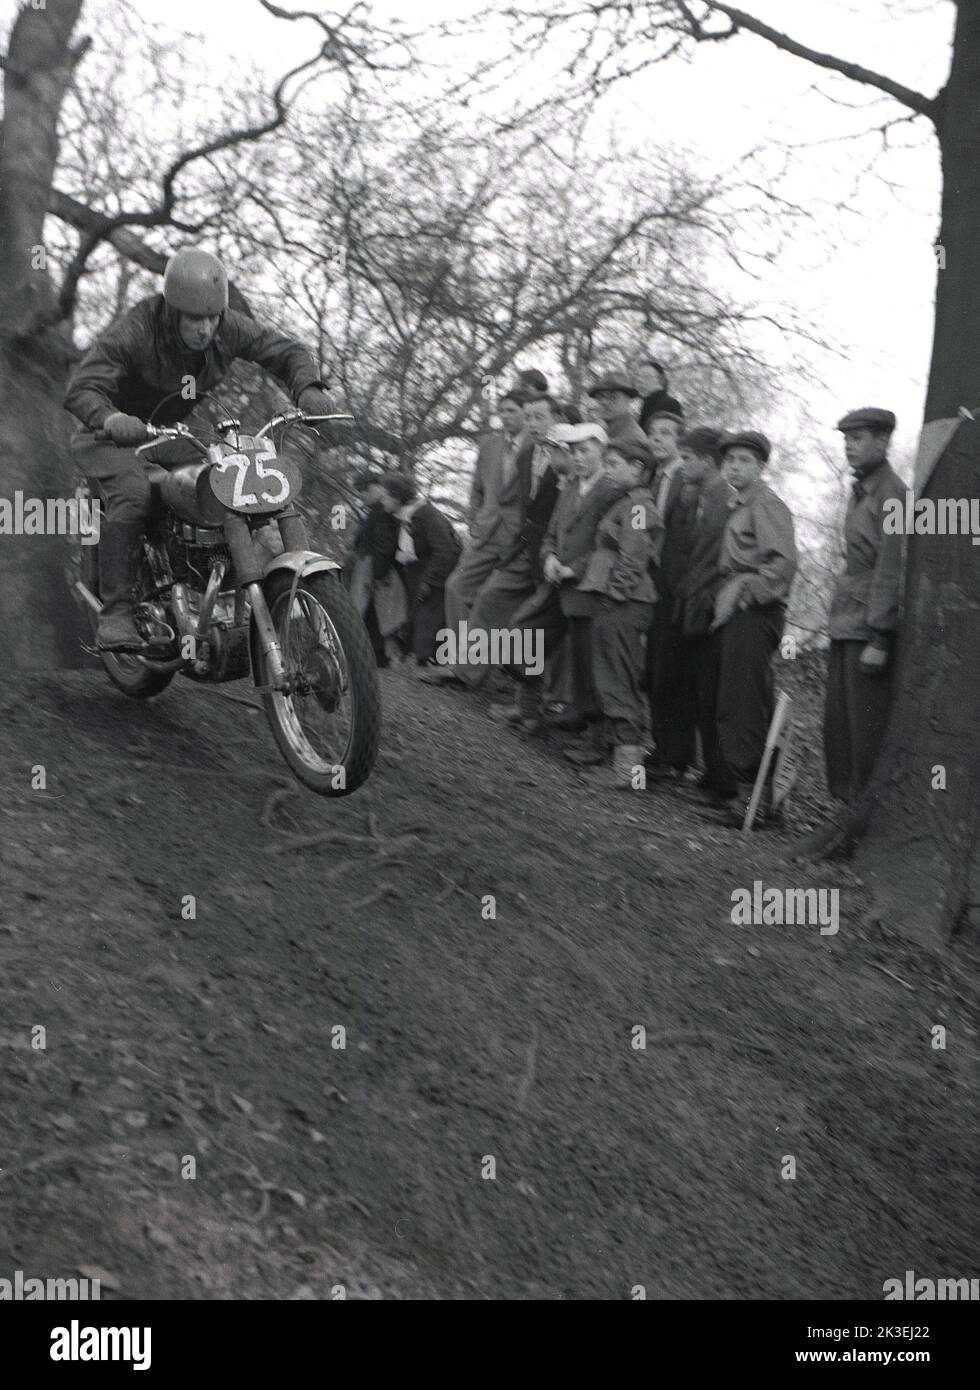 1954, historical, a competitor on his motocycle in the woods in the Seacroft scramble, England, UK. Stock Photo